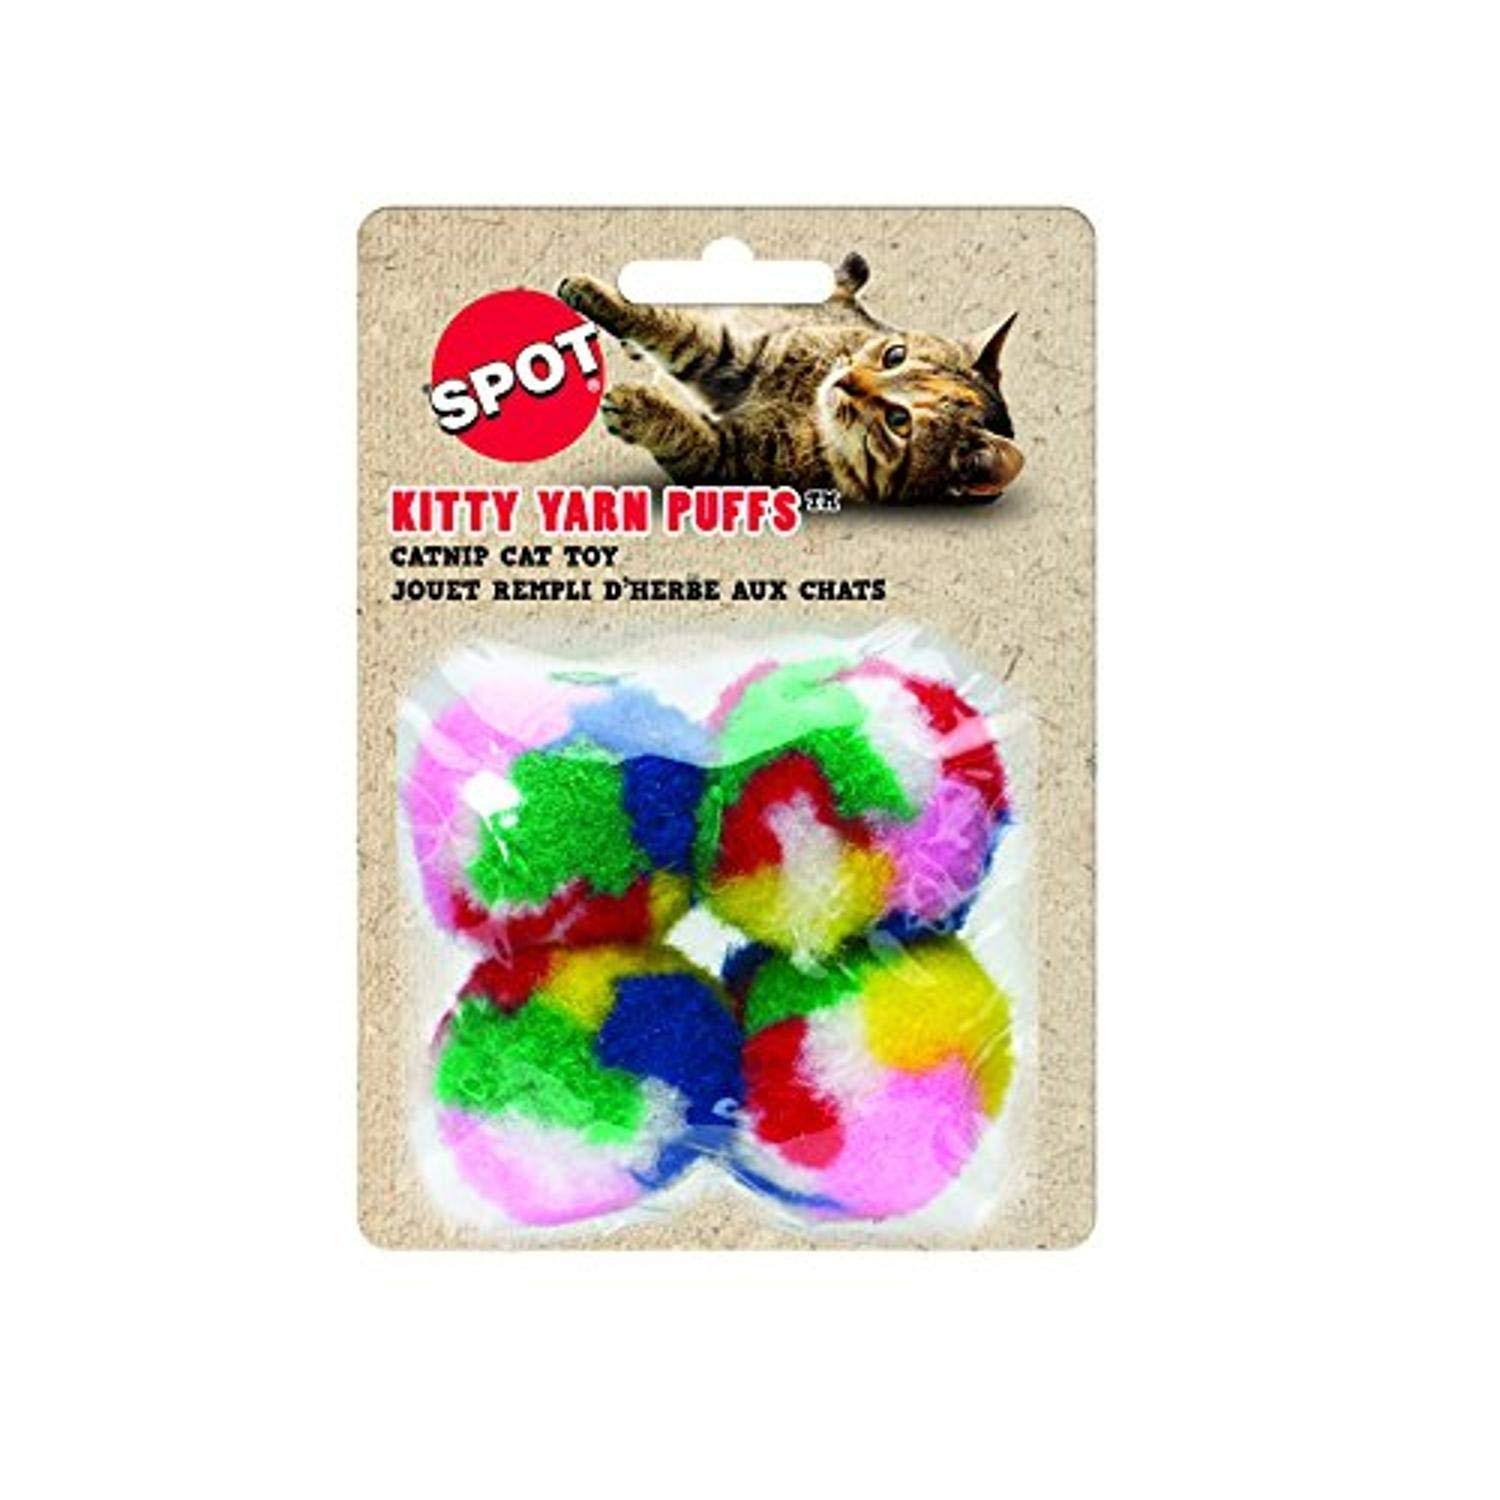 Spot Ethical Yarn Puffs Catnip Cat Toy - Small, x4